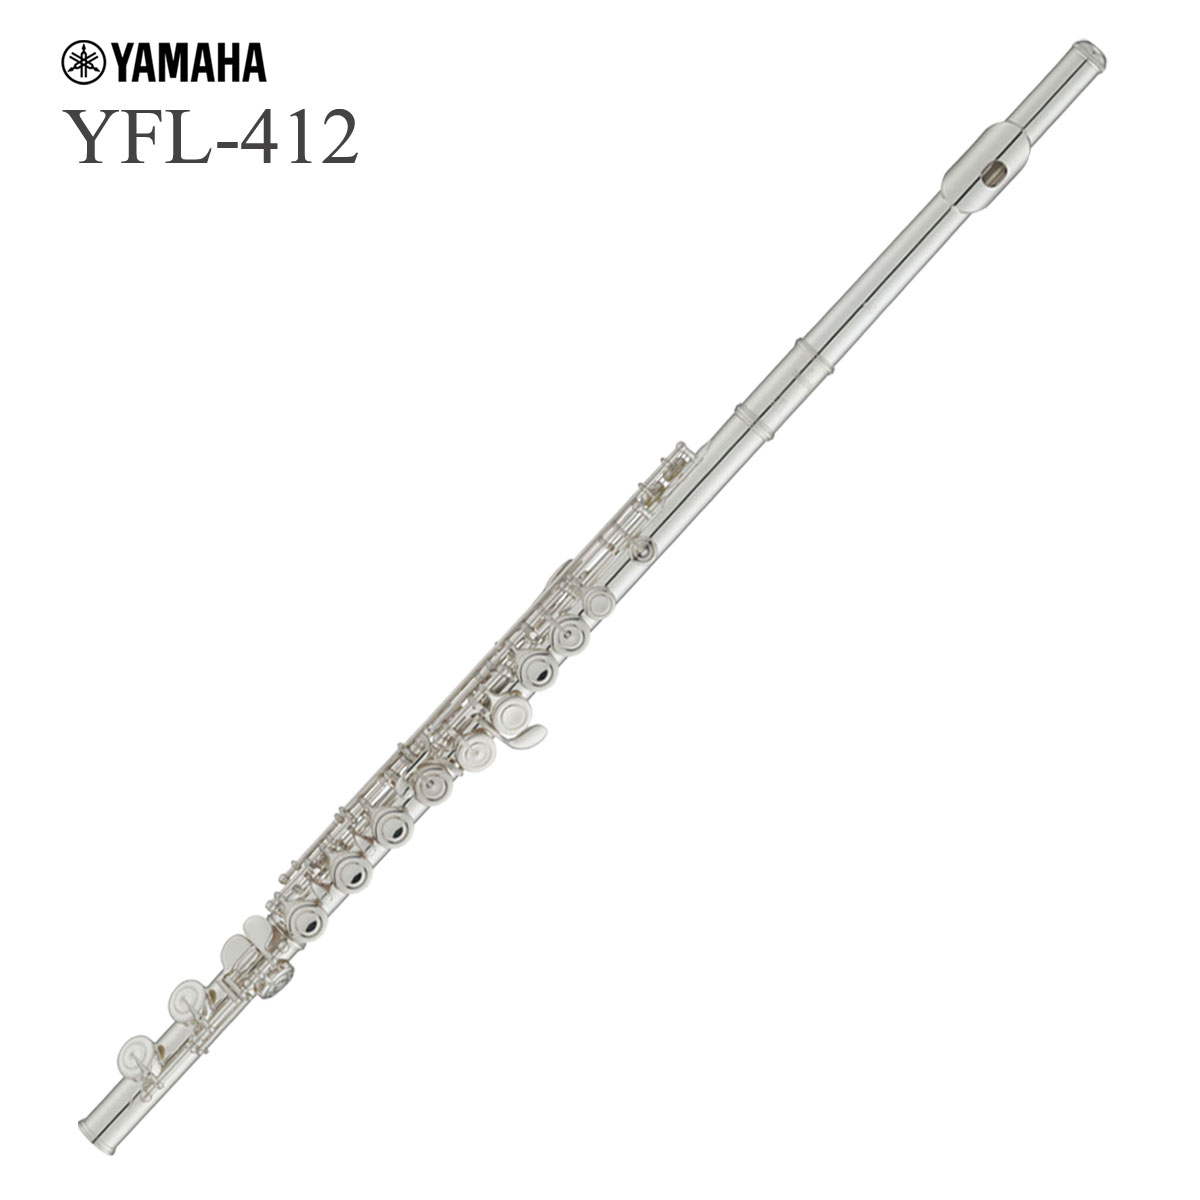 ishibashi: A product made in pipe body silver with Yamaha / YFL ...